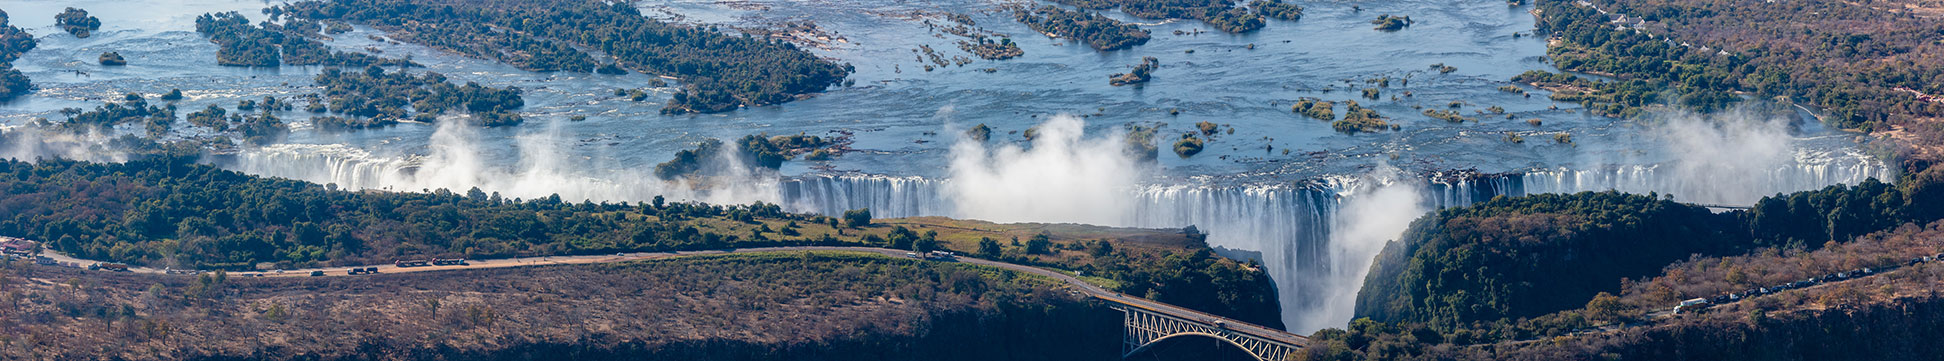 Aerial view of Victoria Falls between Zambia and Zimbabwe